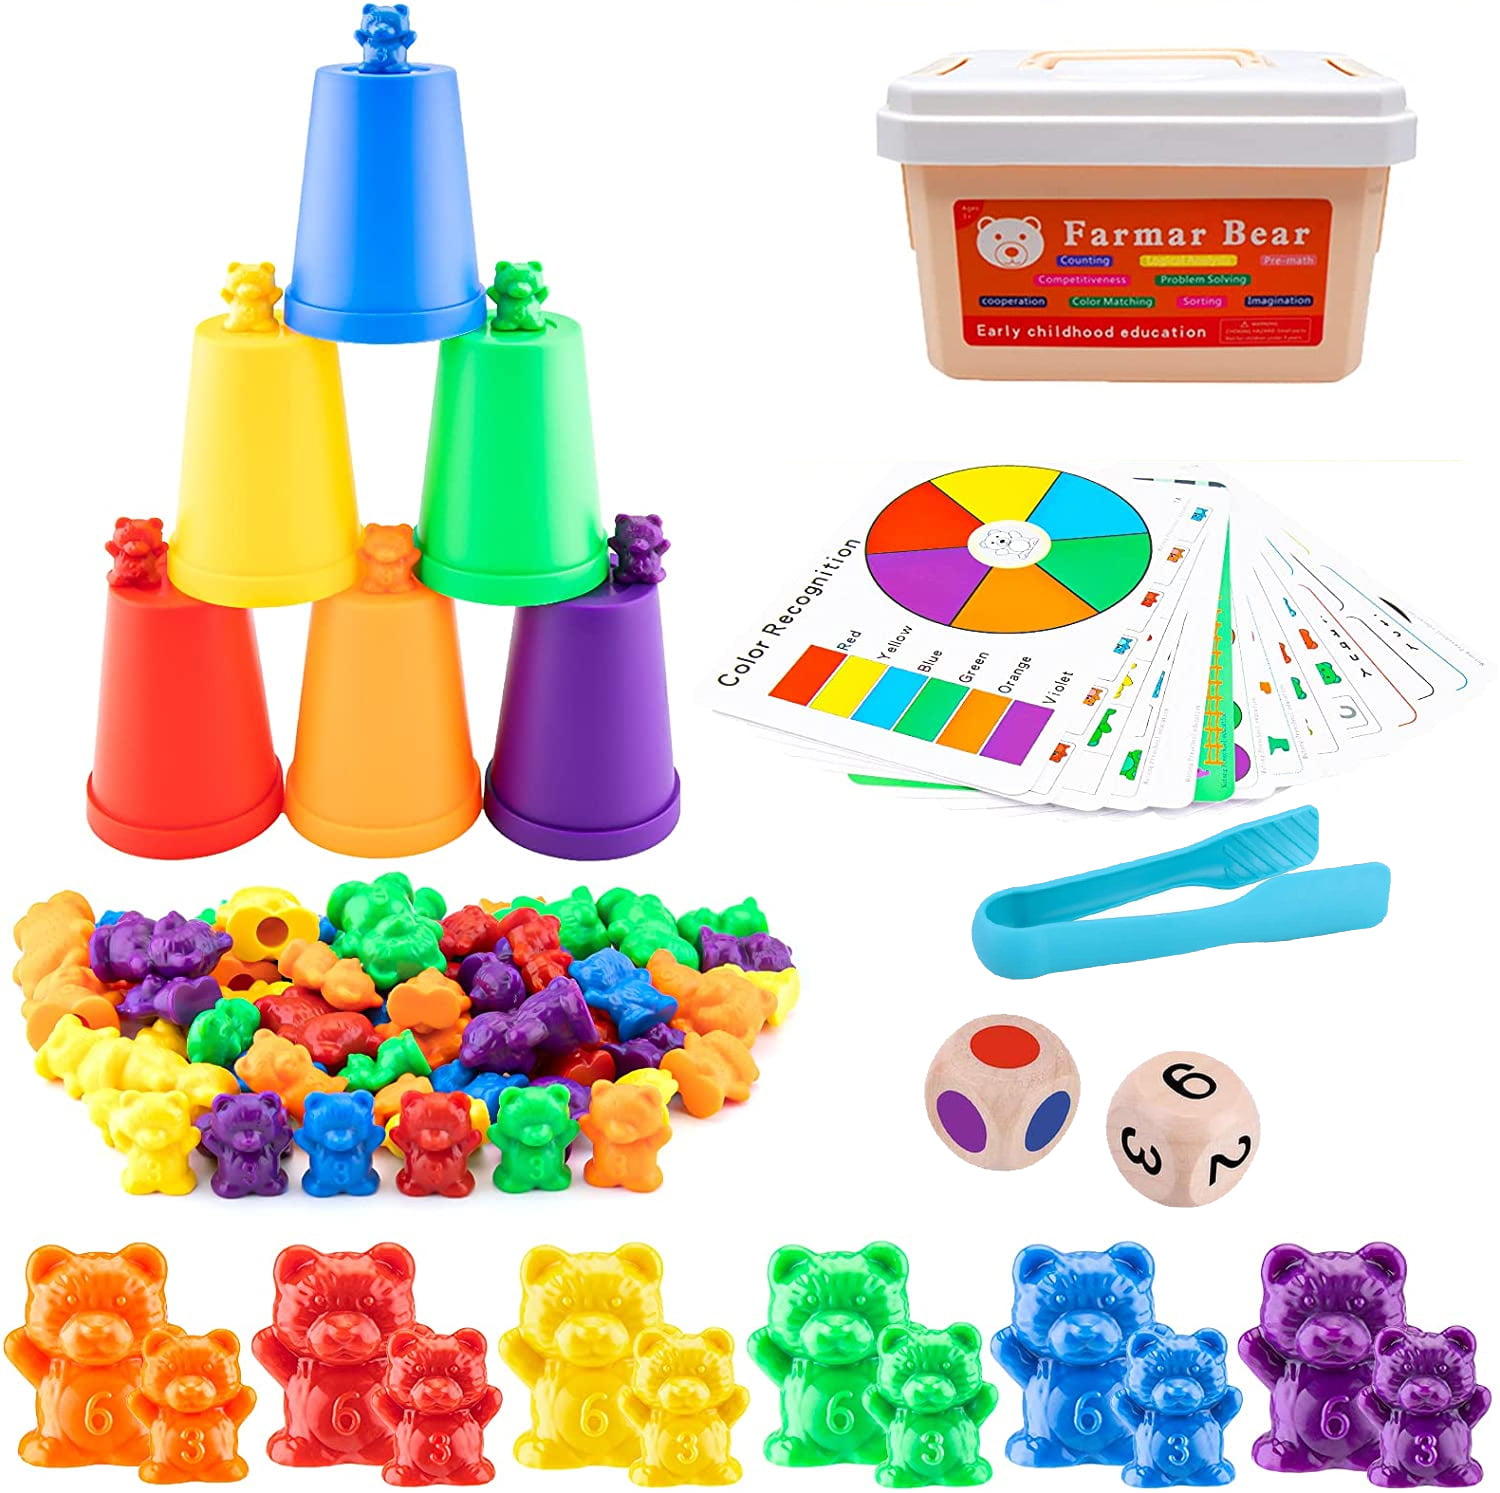 60x Kids Plastic Bear Counting Markers Sorting Education Gifts Toys Set 